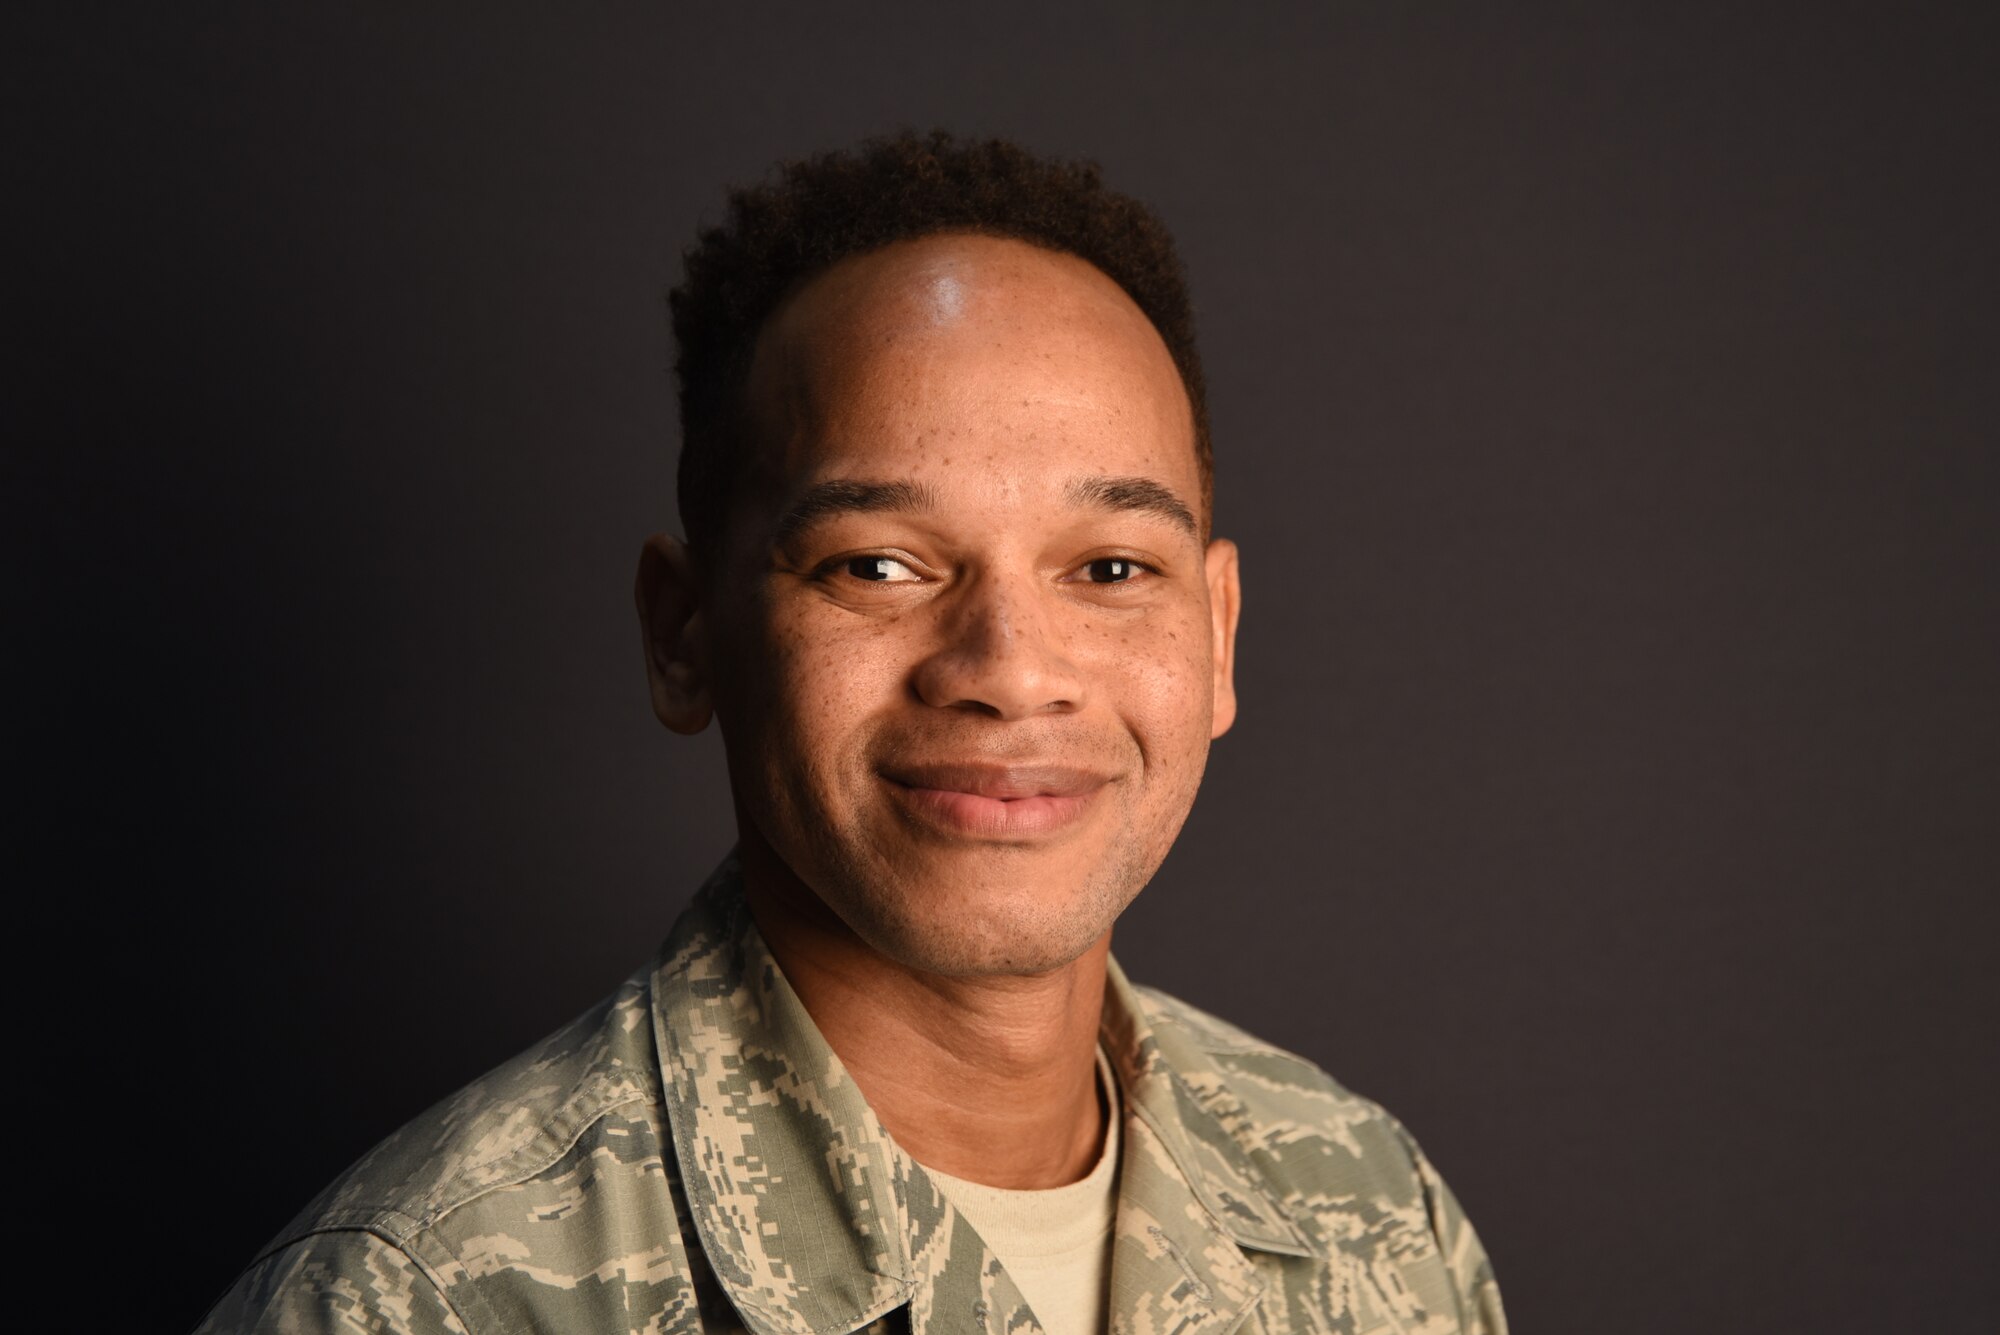 Tech. Sgt. Lorenzo Frankin works in the 403rd Wing Equal Opportunity office at Keesler Air Force Base, Biloxi, Mississippi. (U.S. Air Force photo by Tech. Sgt. Michael Farrar)